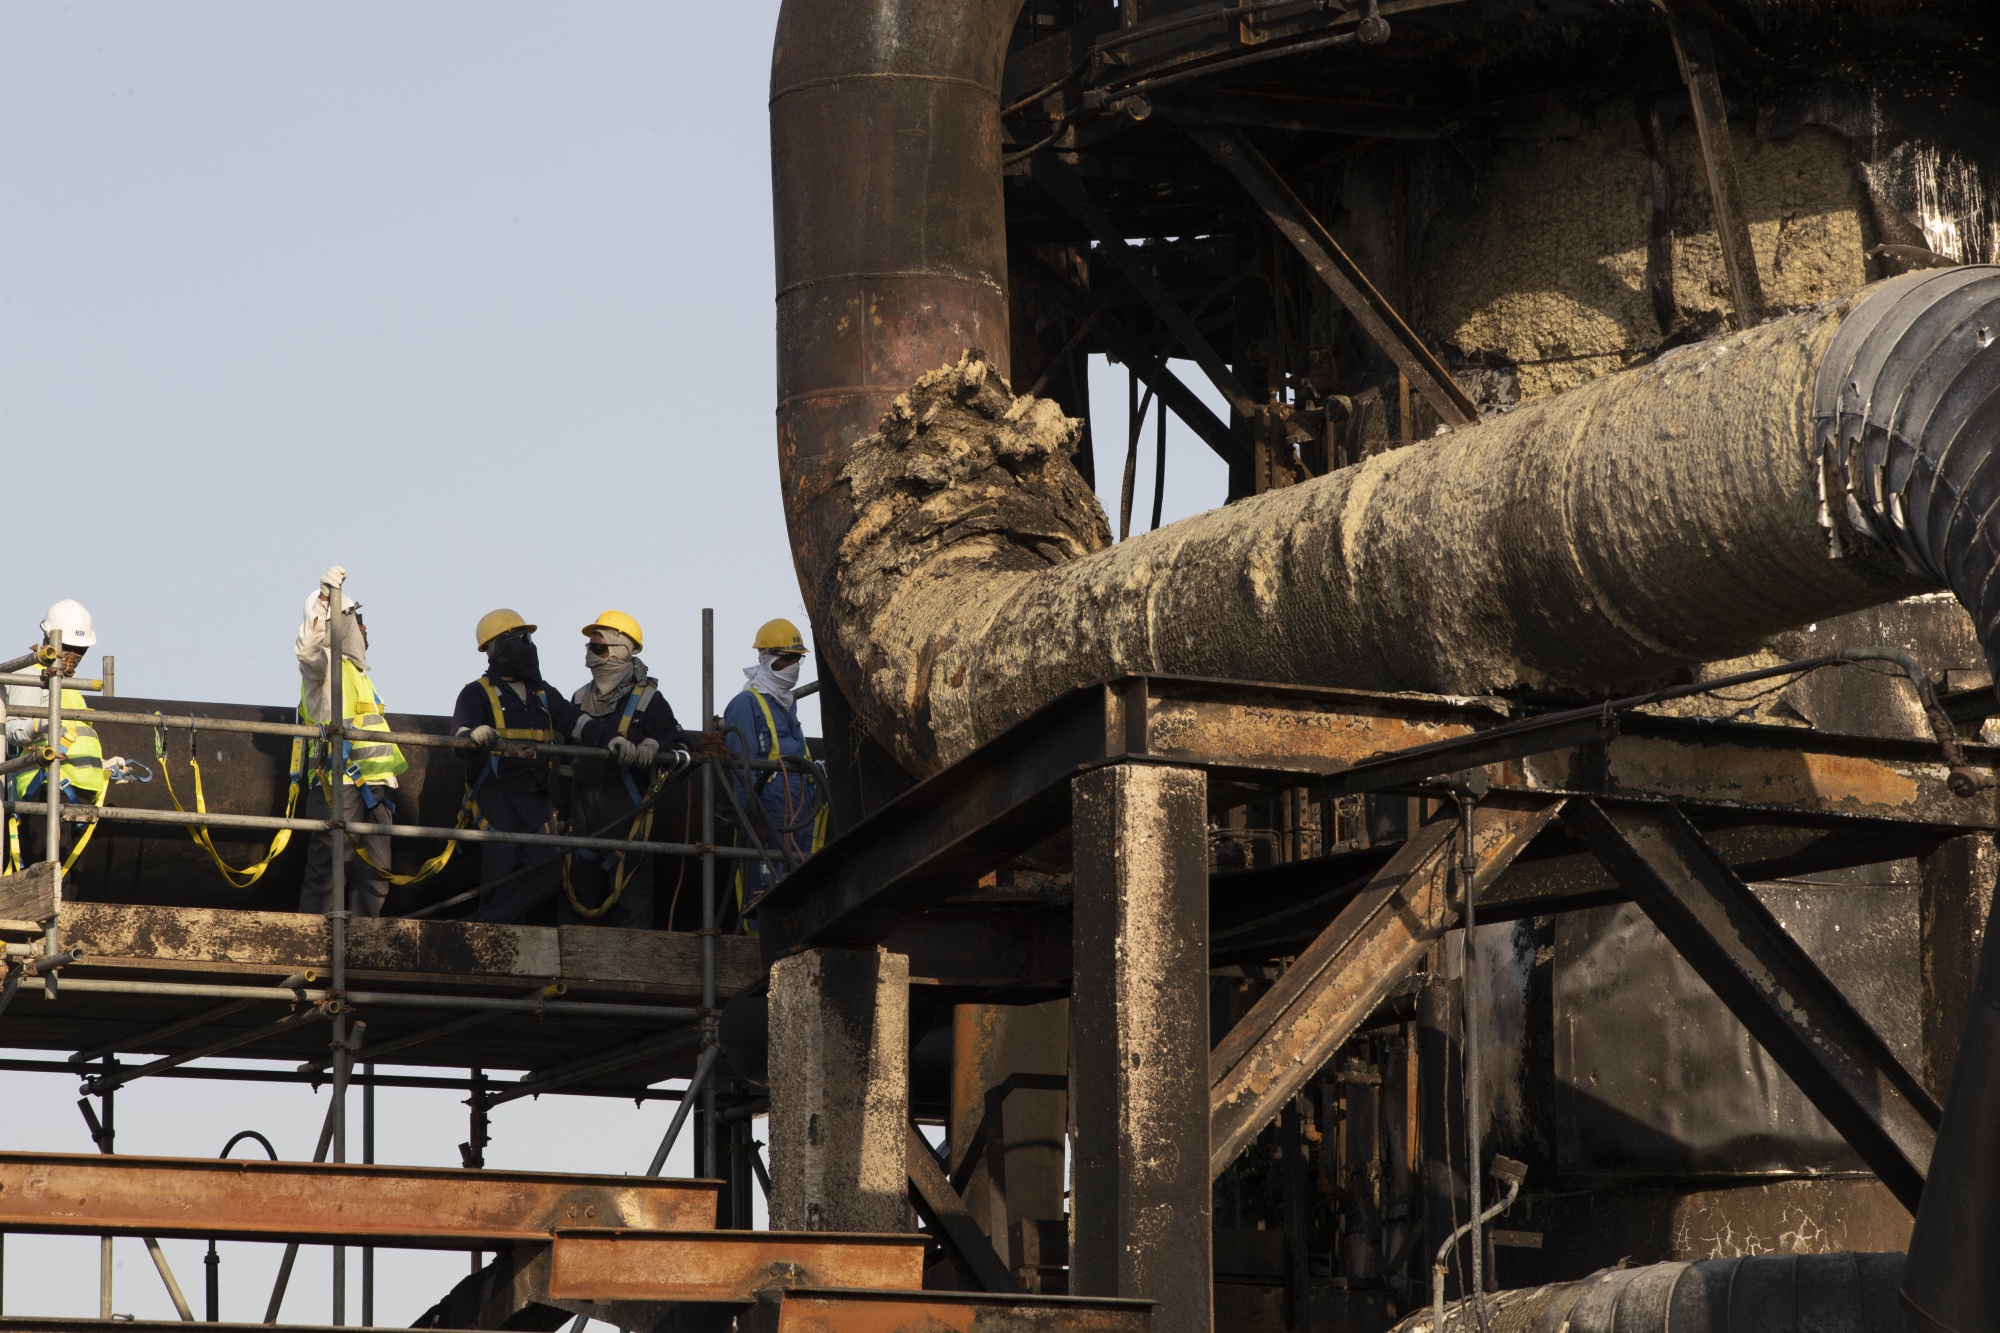 Workers repair a damaged refining tower at Saudi Aramco's Abqaiq crude oil processing plant&nbsp;on&nbsp;Sept. 20.&nbsp;